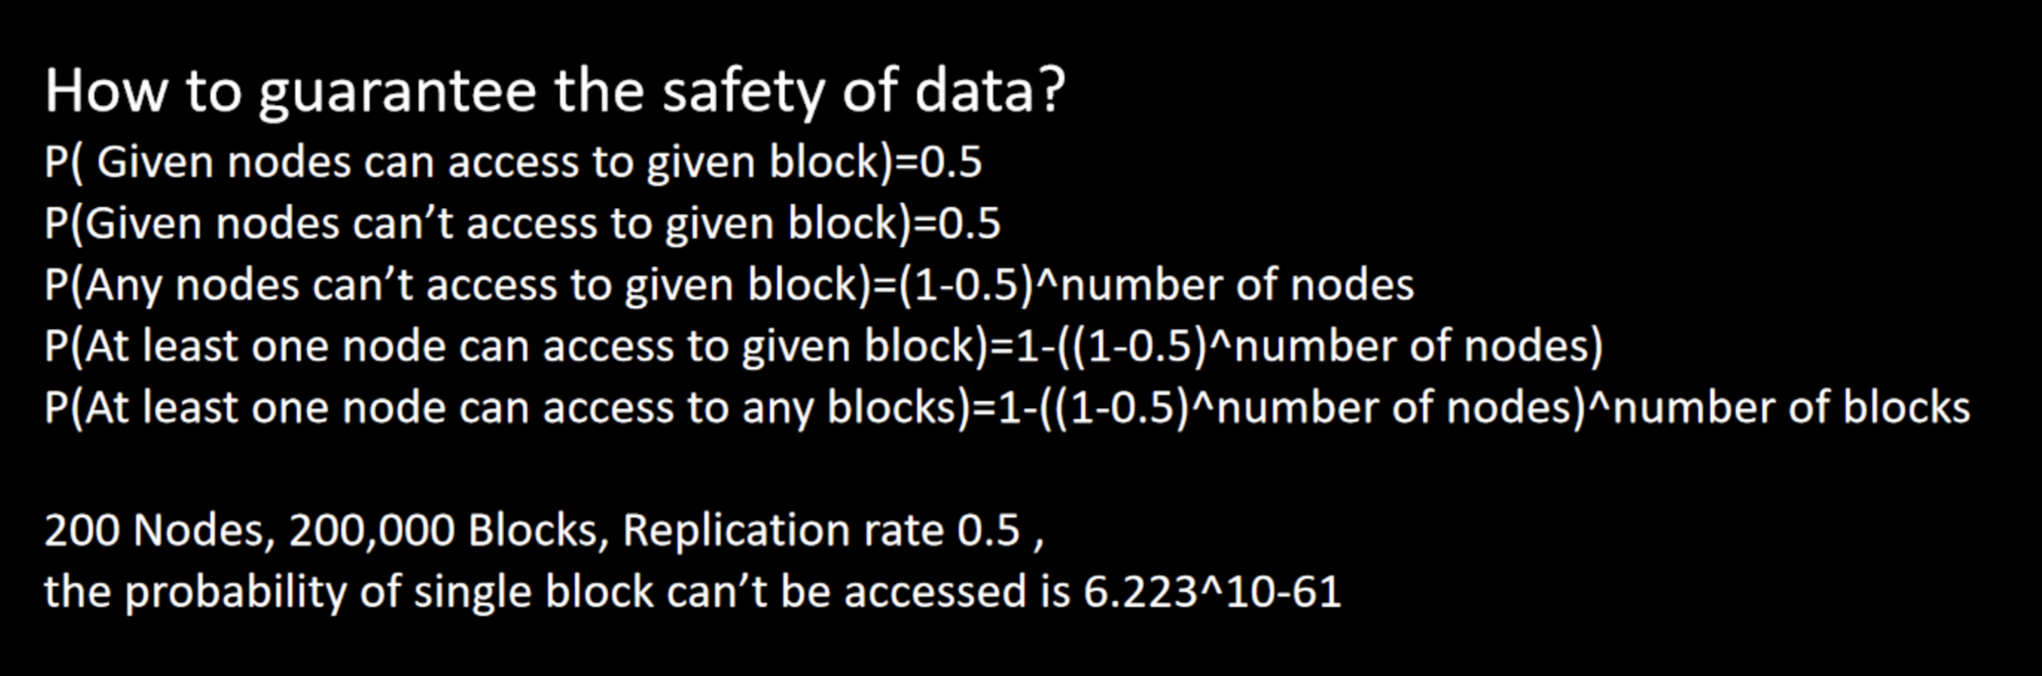 safety of data